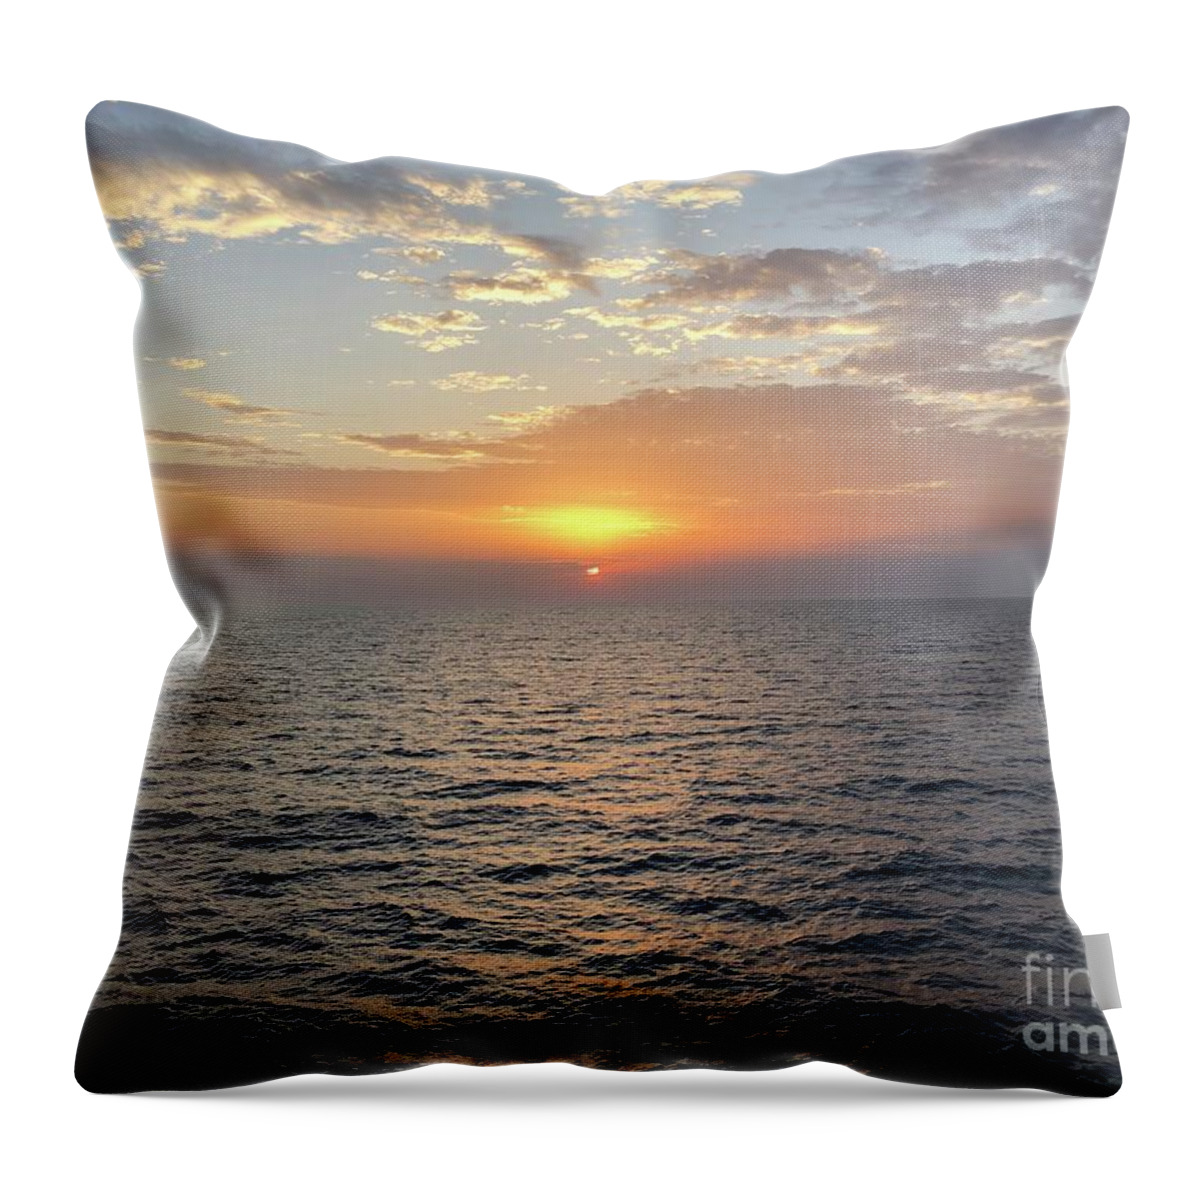 Sunset Throw Pillow featuring the photograph Shipboard Sunset by Kate Conaboy